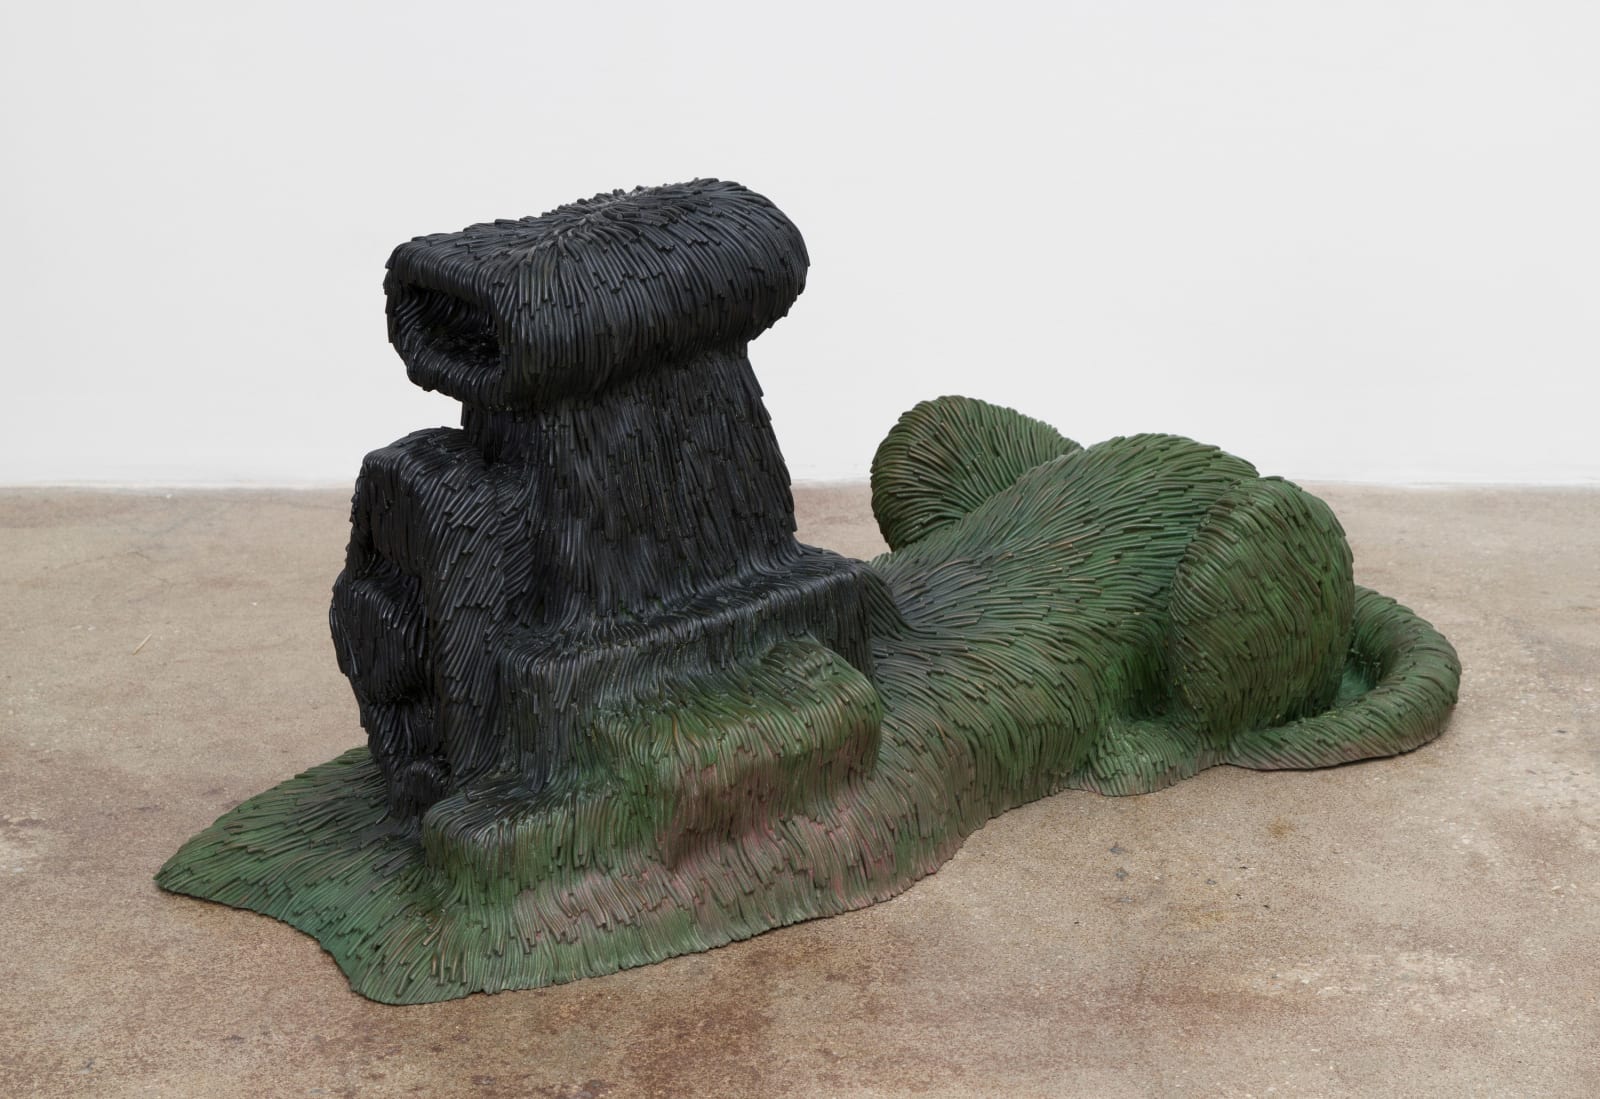 Free-standing bronze sculpture of an lion-like animal body and machine-like engine for the head resembling the Sphinx. The sculpture is cast with a surface texture resembling shaggy hair and treated with a green patina that gradually turns black, from bottom to top.   